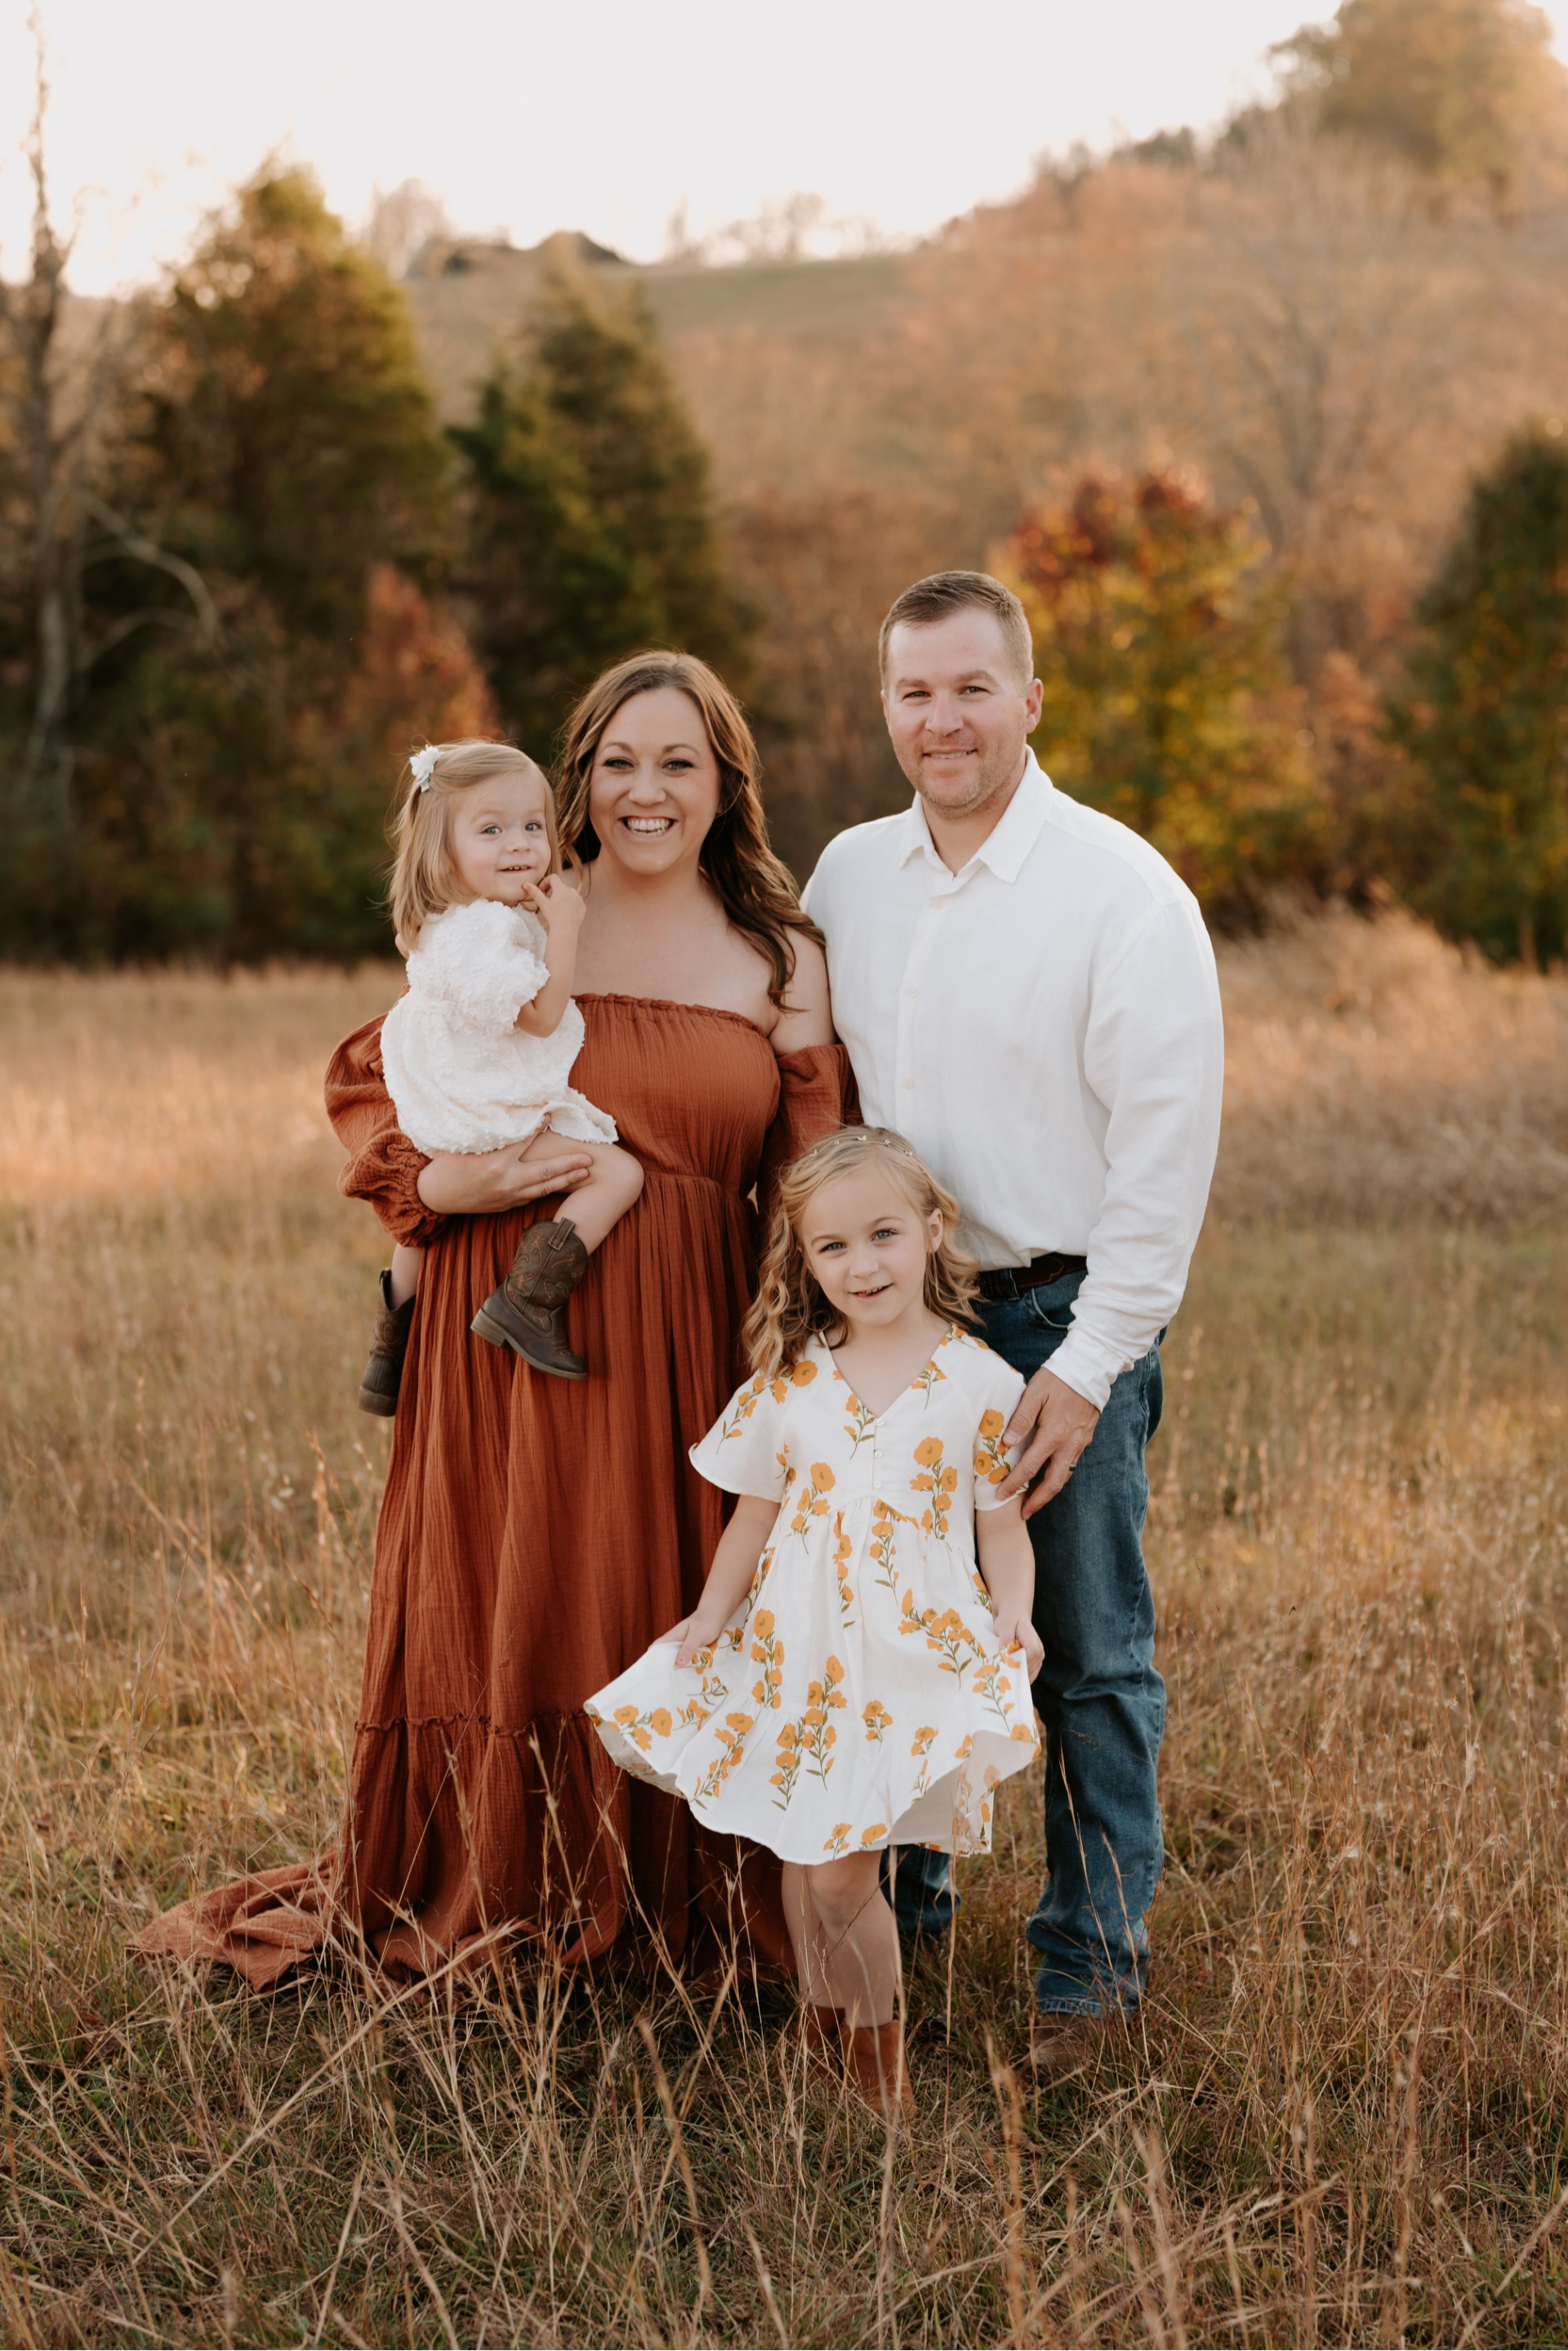 Kaylen Wood and family